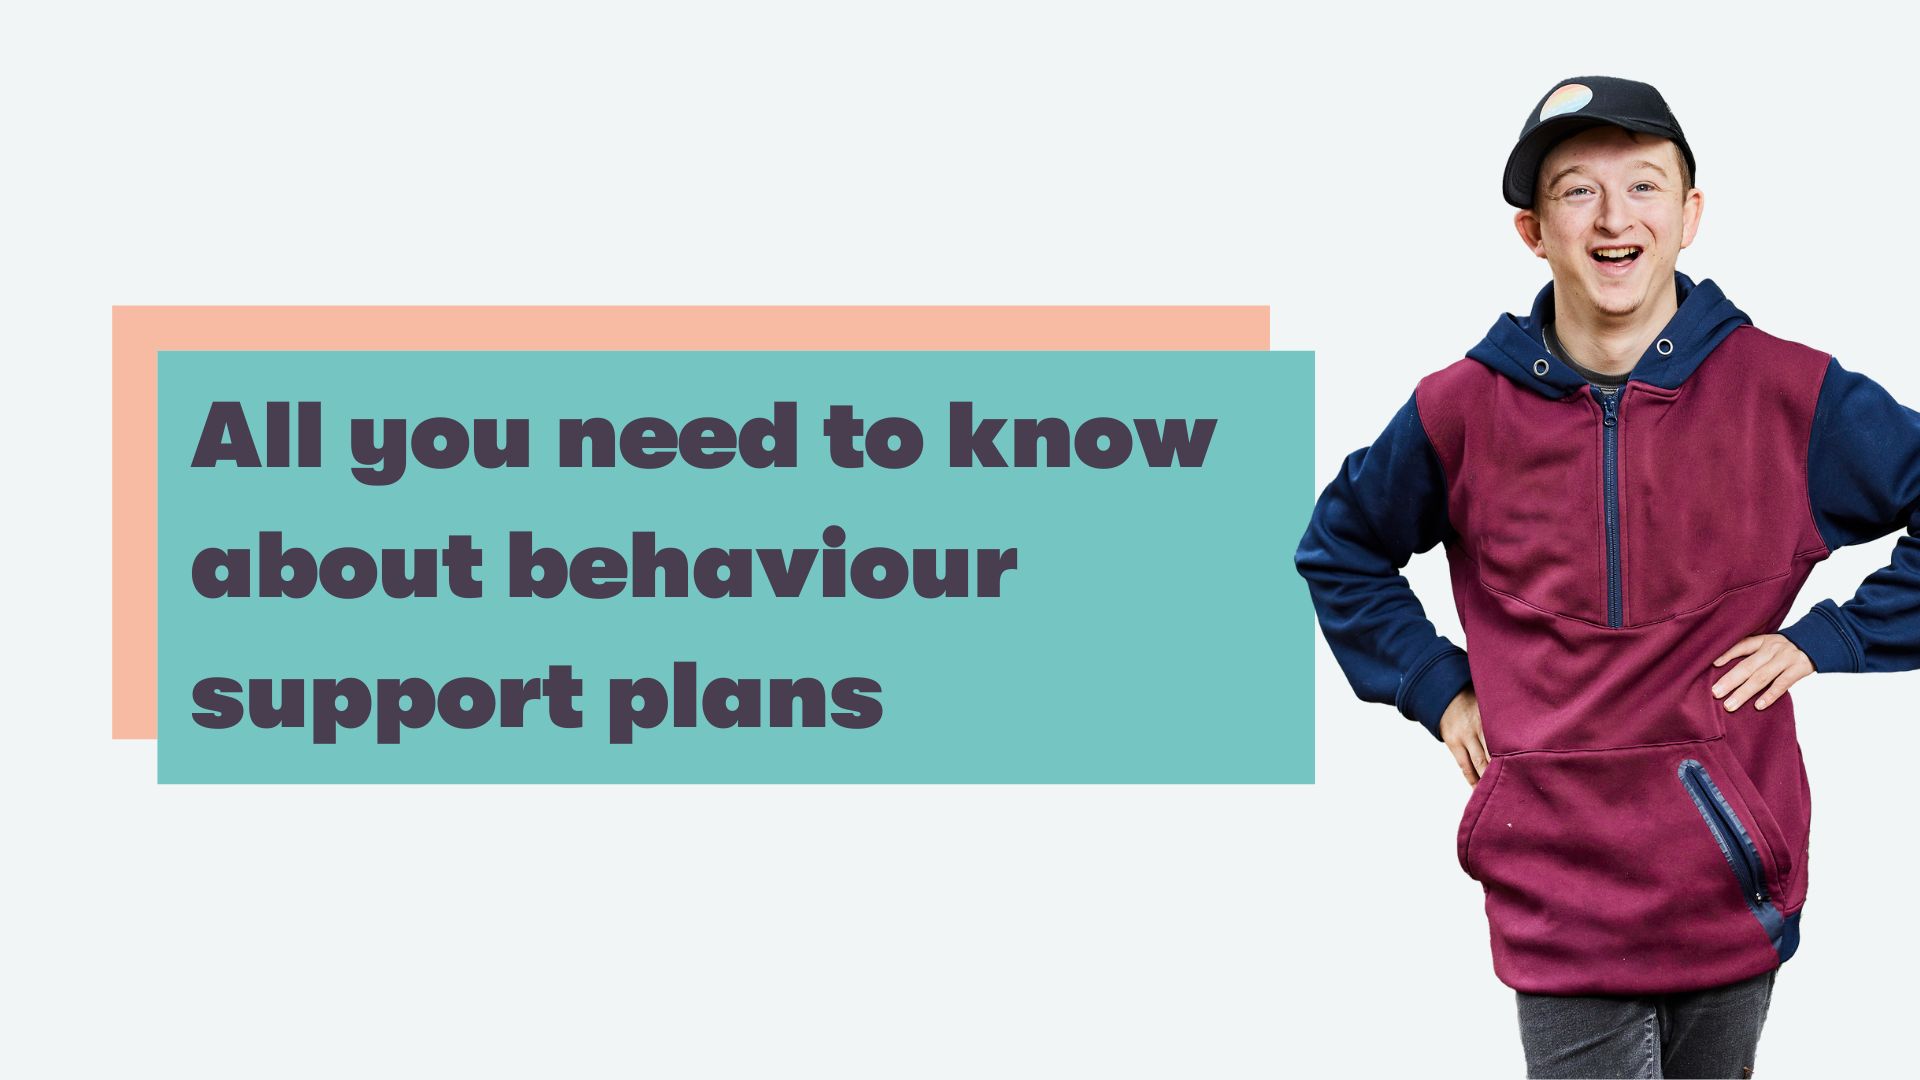 All you need to know about behaviour support plans